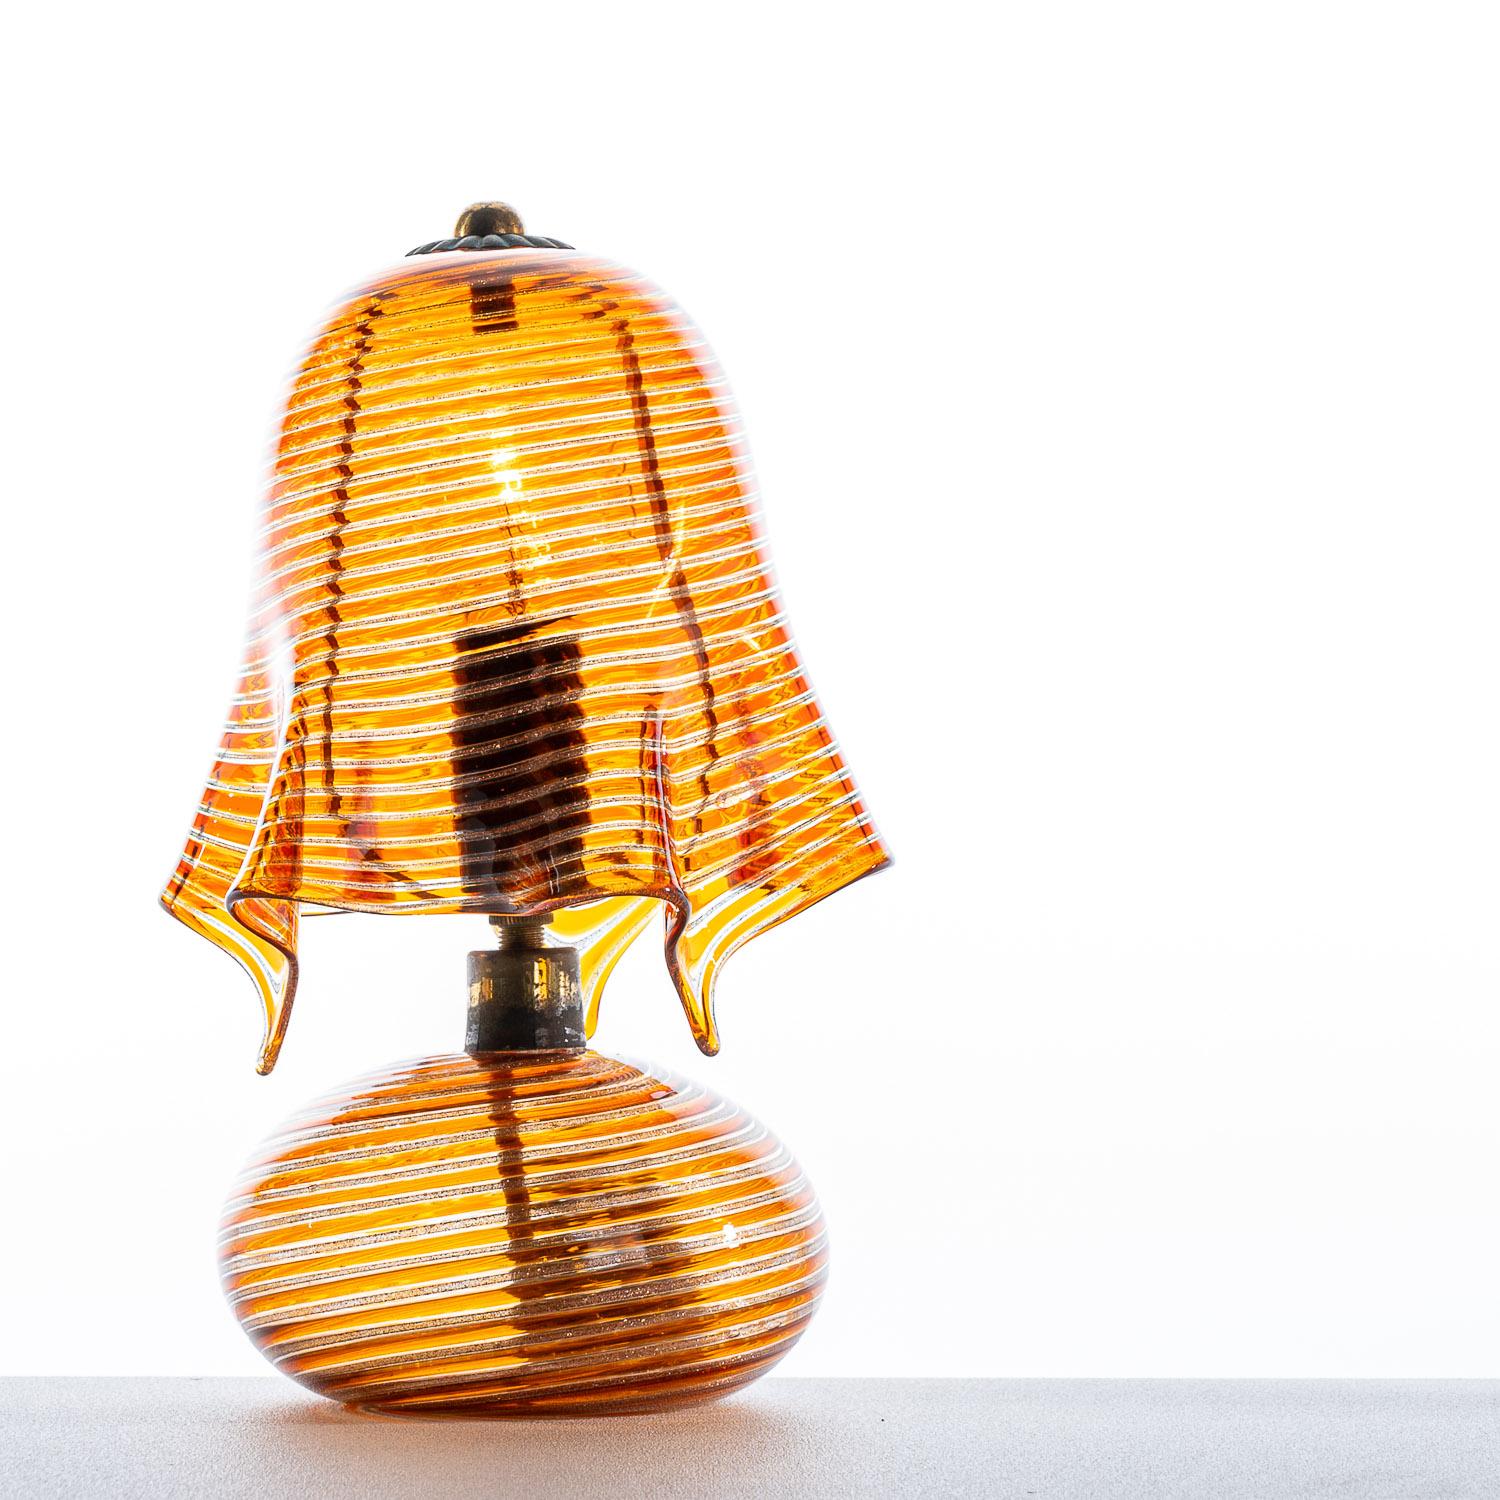 This unique piece comes from 1940s attributed to Italian designer Aureliano Toso. The sculpted transparent-amber shade flows elegantly, giving an almost material-like appearance. This unique lamp will catch the eye in any room and looks incredible